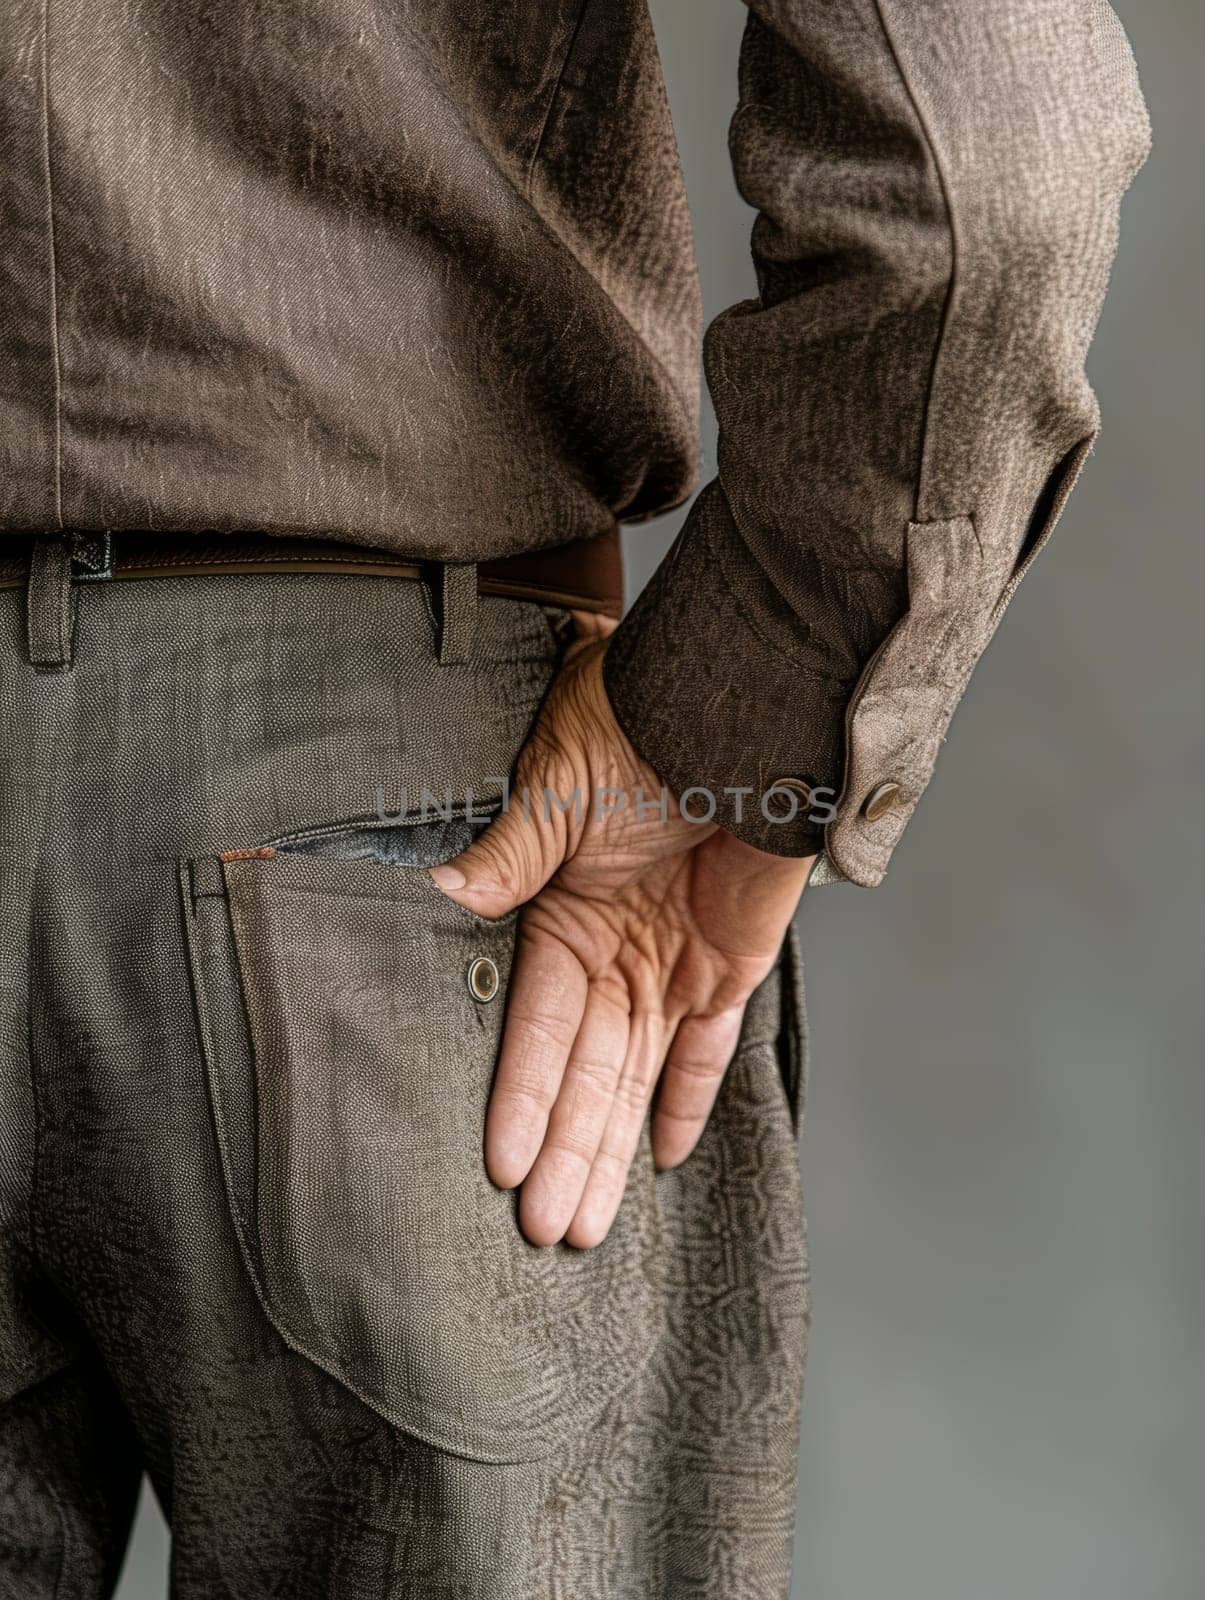 A hand rests on the lower back expressing pain, set against a soft, neutral-toned outfit and background, portraying the subtlety of chronic pain